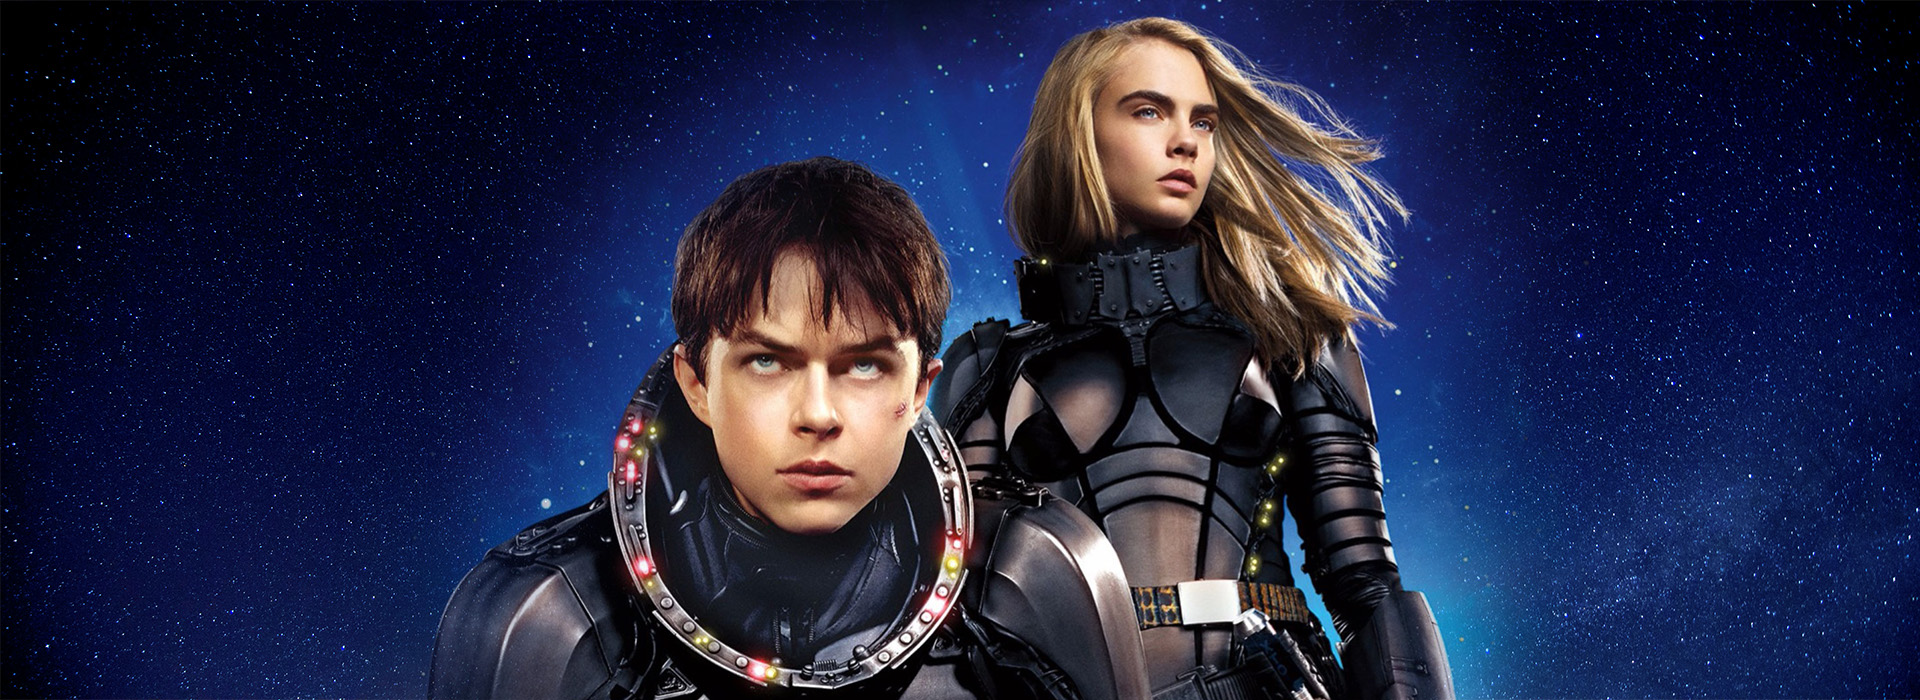 Movie poster Valerian and the City of a Thousand Planets